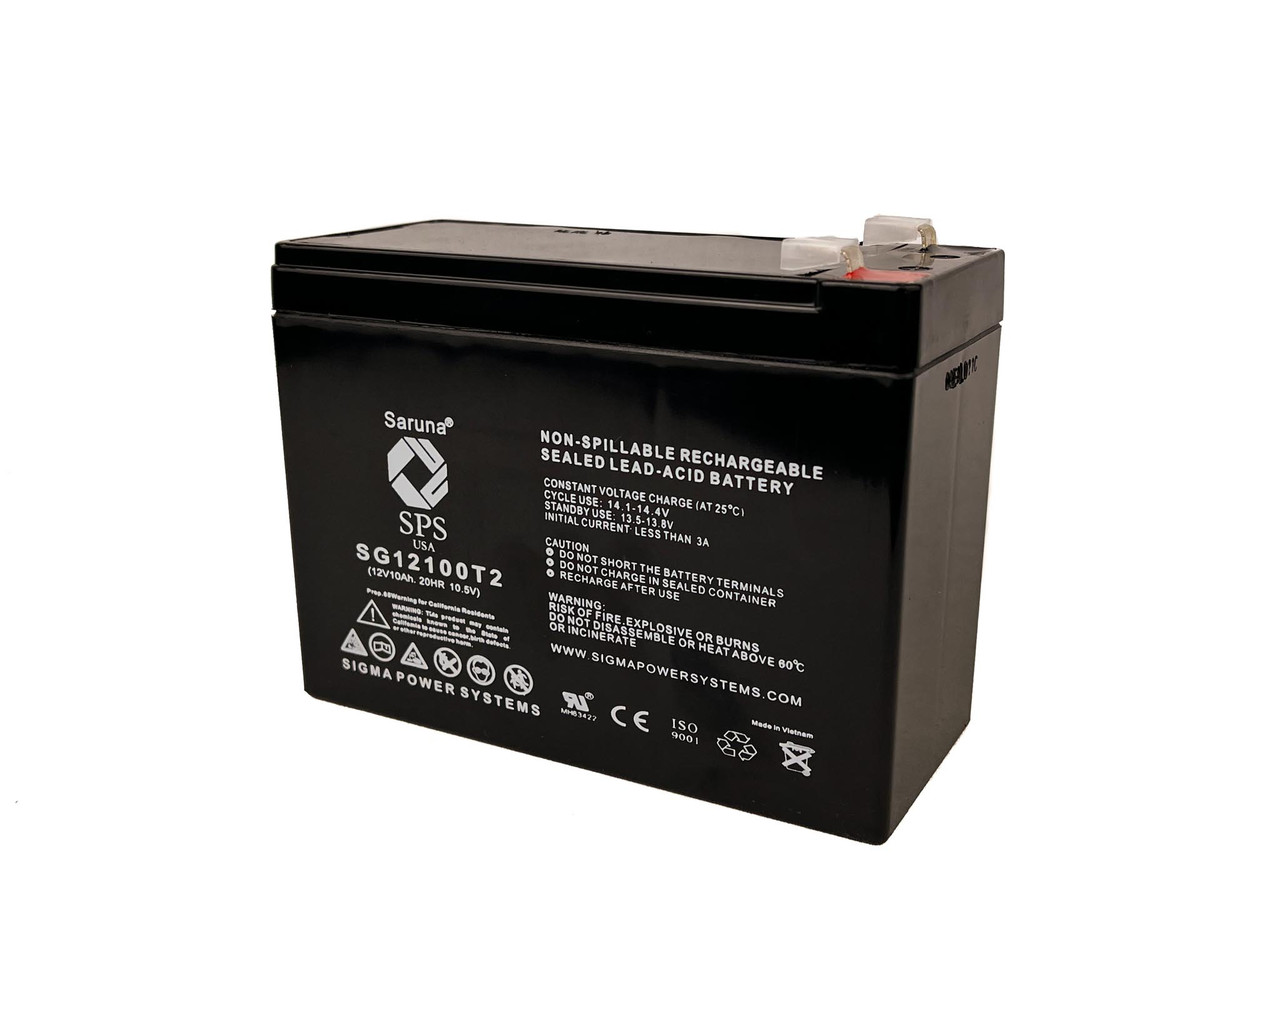 Raion Power 12V 10Ah Non-Spillable Replacement Rechargebale Battery for Minimoto ATV